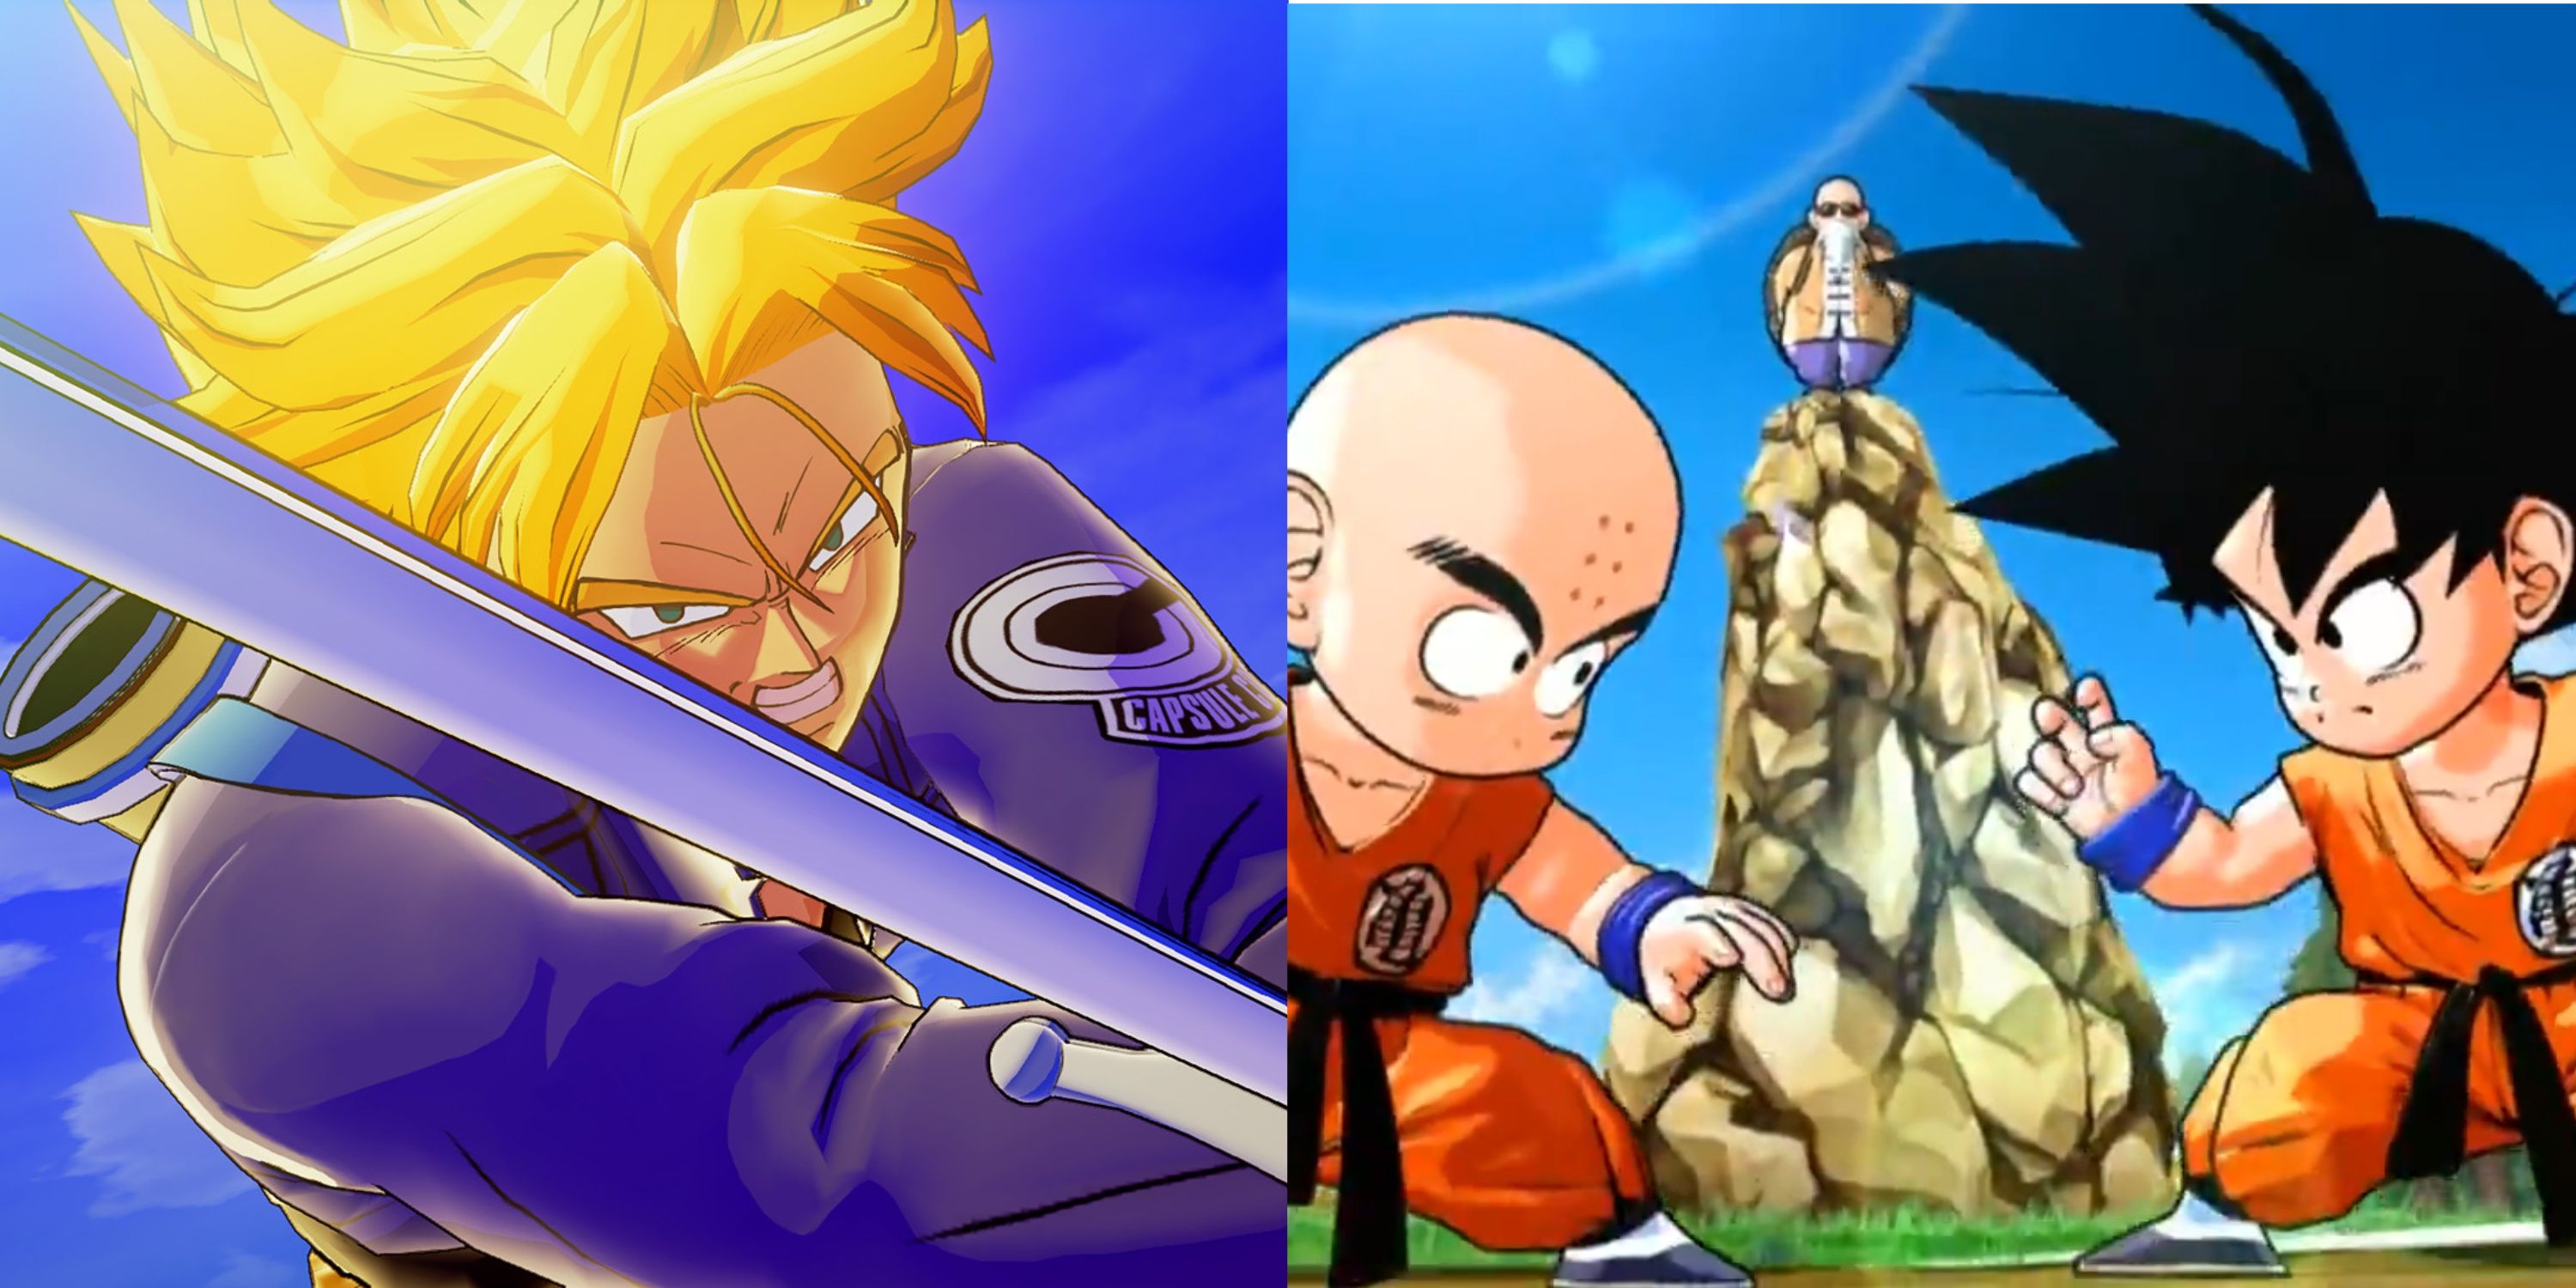 A split image featuring Trunks, Krillin, Master Roshi, and Goku from Dragon Ball Z video games